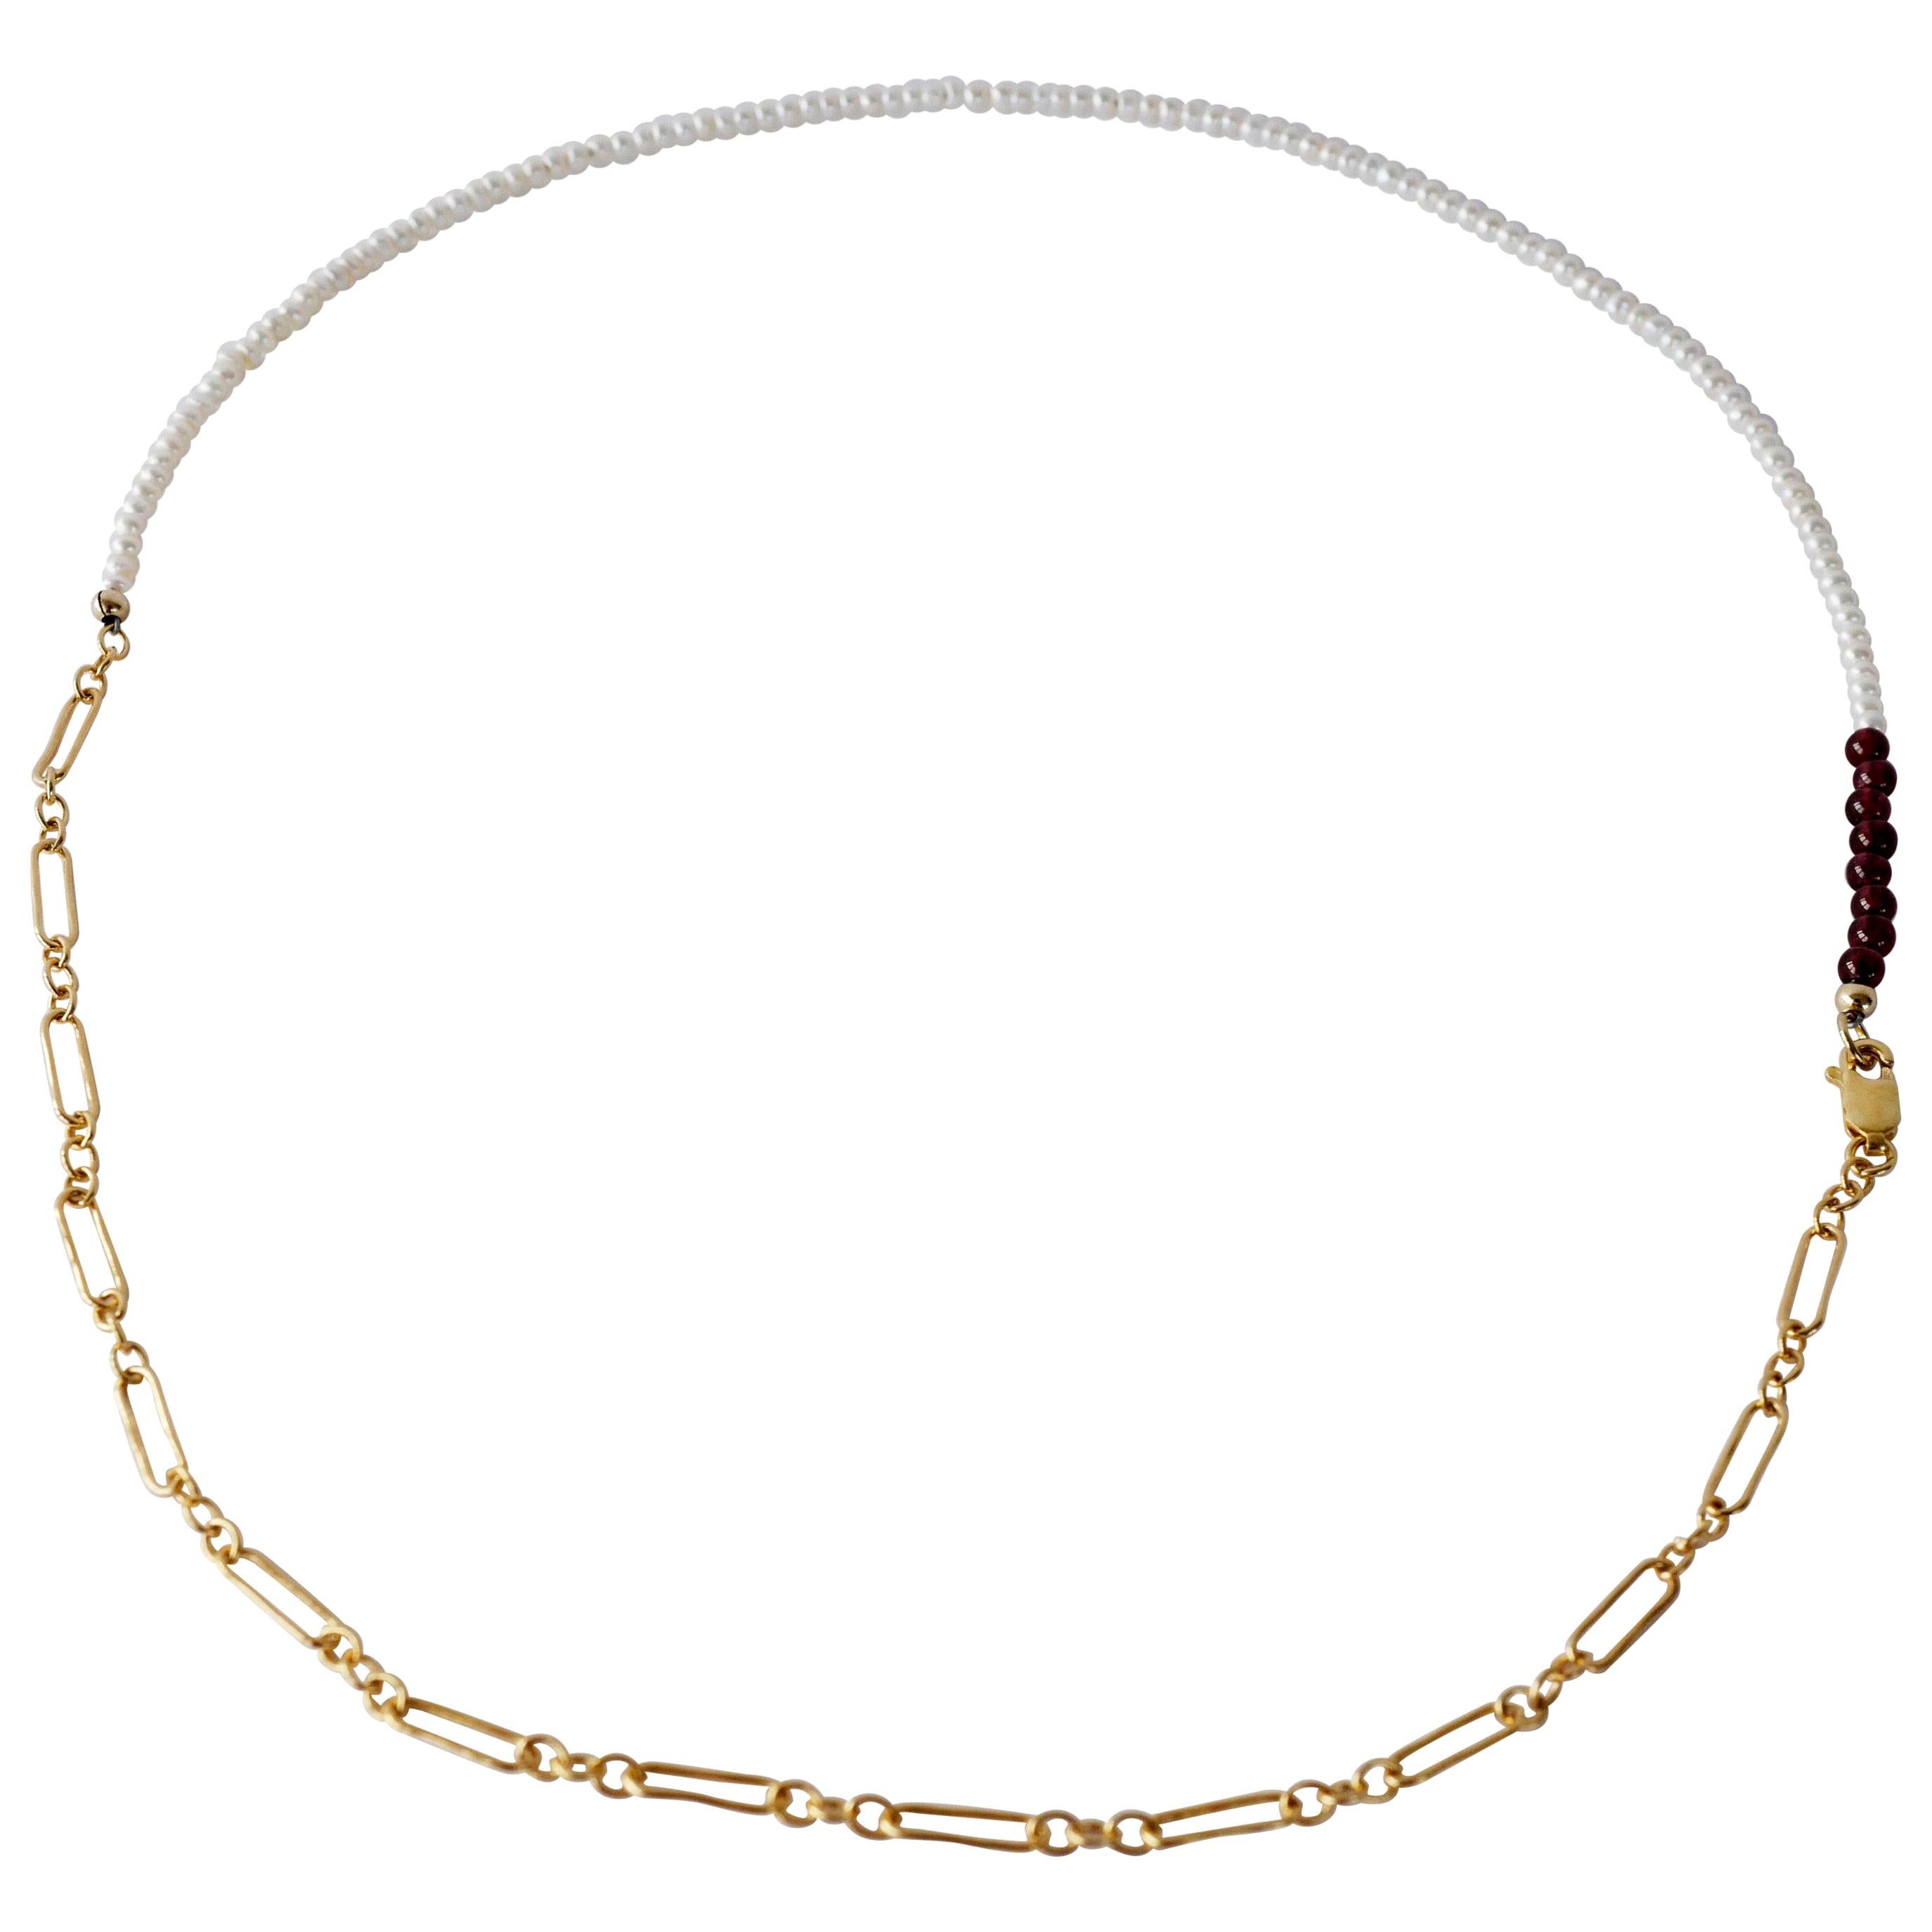 White Pearl Red Garnet Choker Bead Necklace Gold Filled Chain 20" J Dauphin For Sale